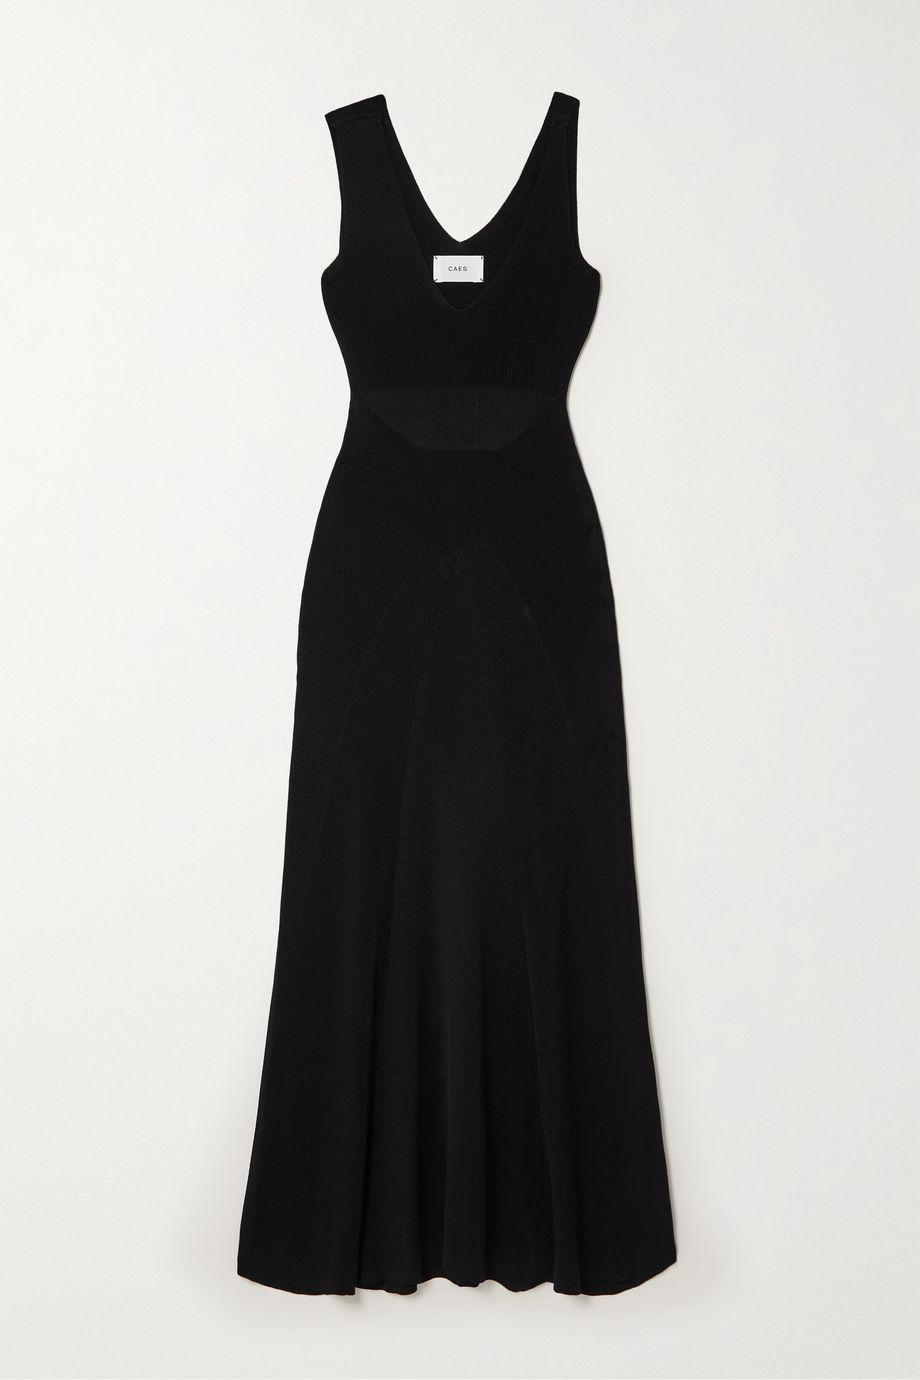 Cutout paneled knitted maxi dress by CAES